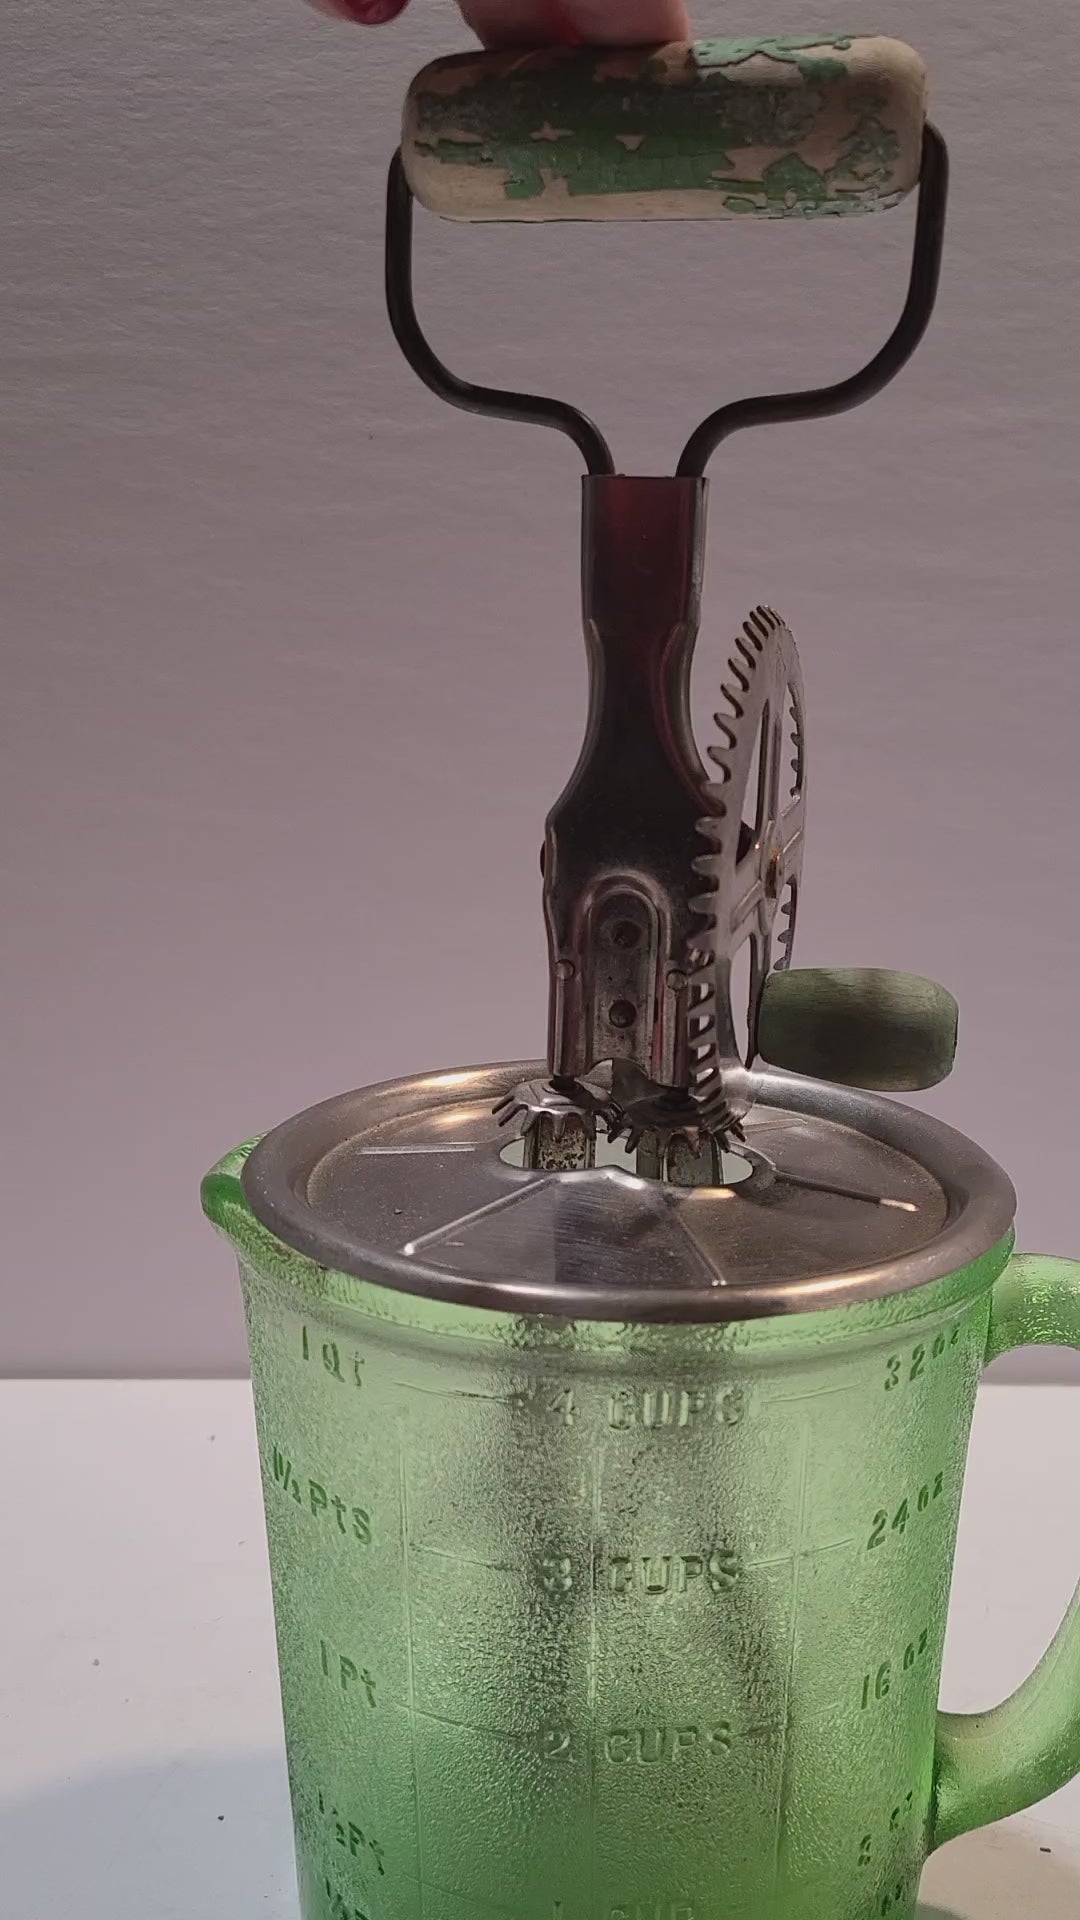 Vintage Green 4 Cup Glass Measuring Pitcher A&J Hand Mixer Beater USA  Vintage Kitchen Decor - The Junk Parlor